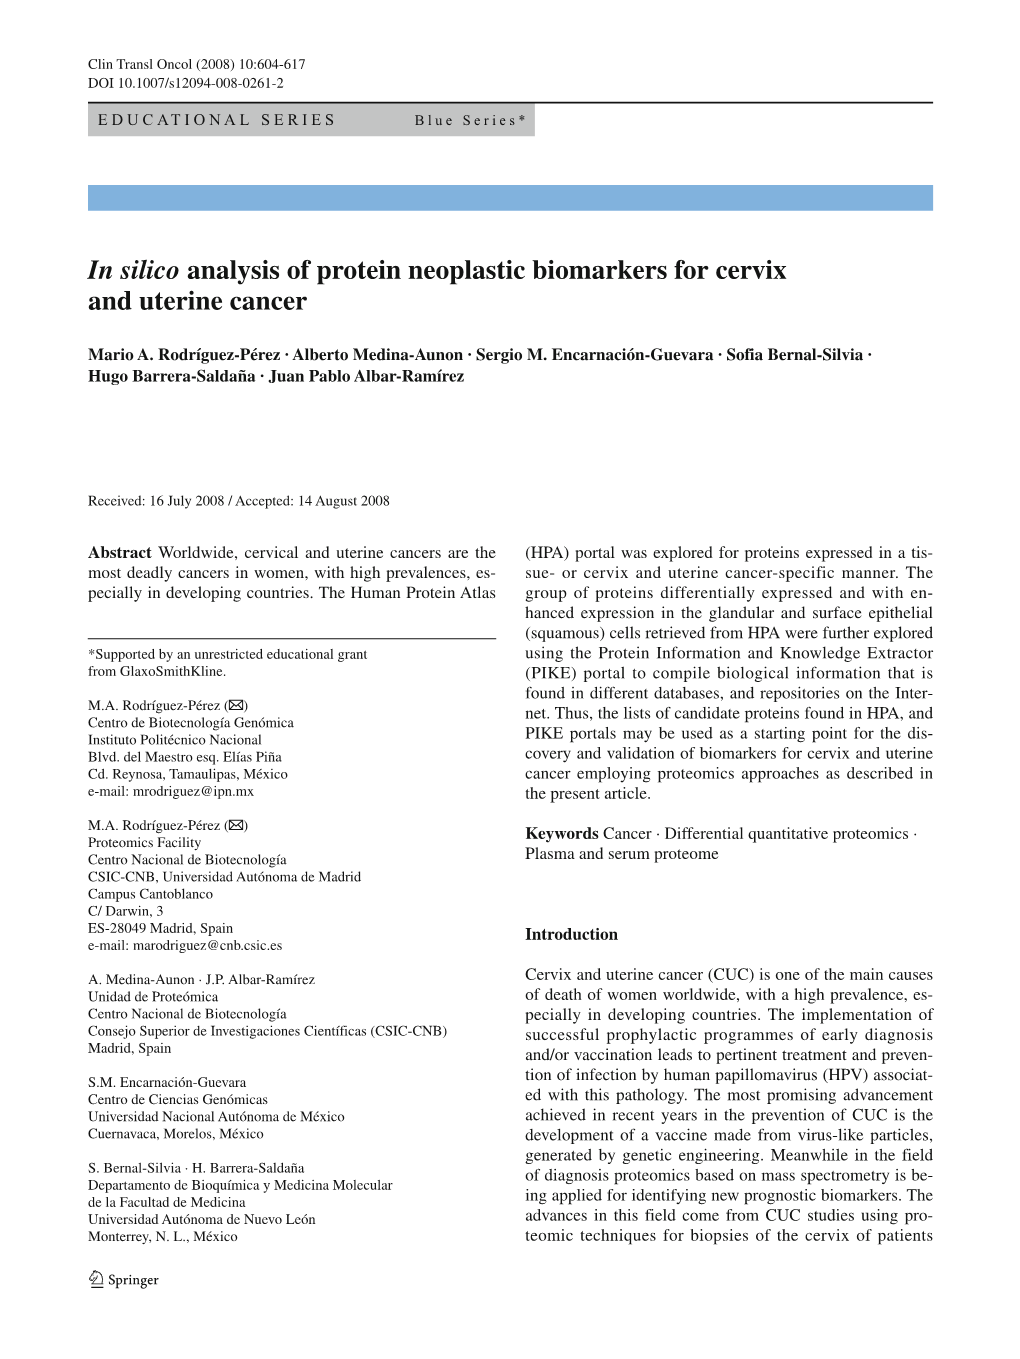 In Silico Analysis of Protein Neoplastic Biomarkers for Cervix and Uterine Cancer